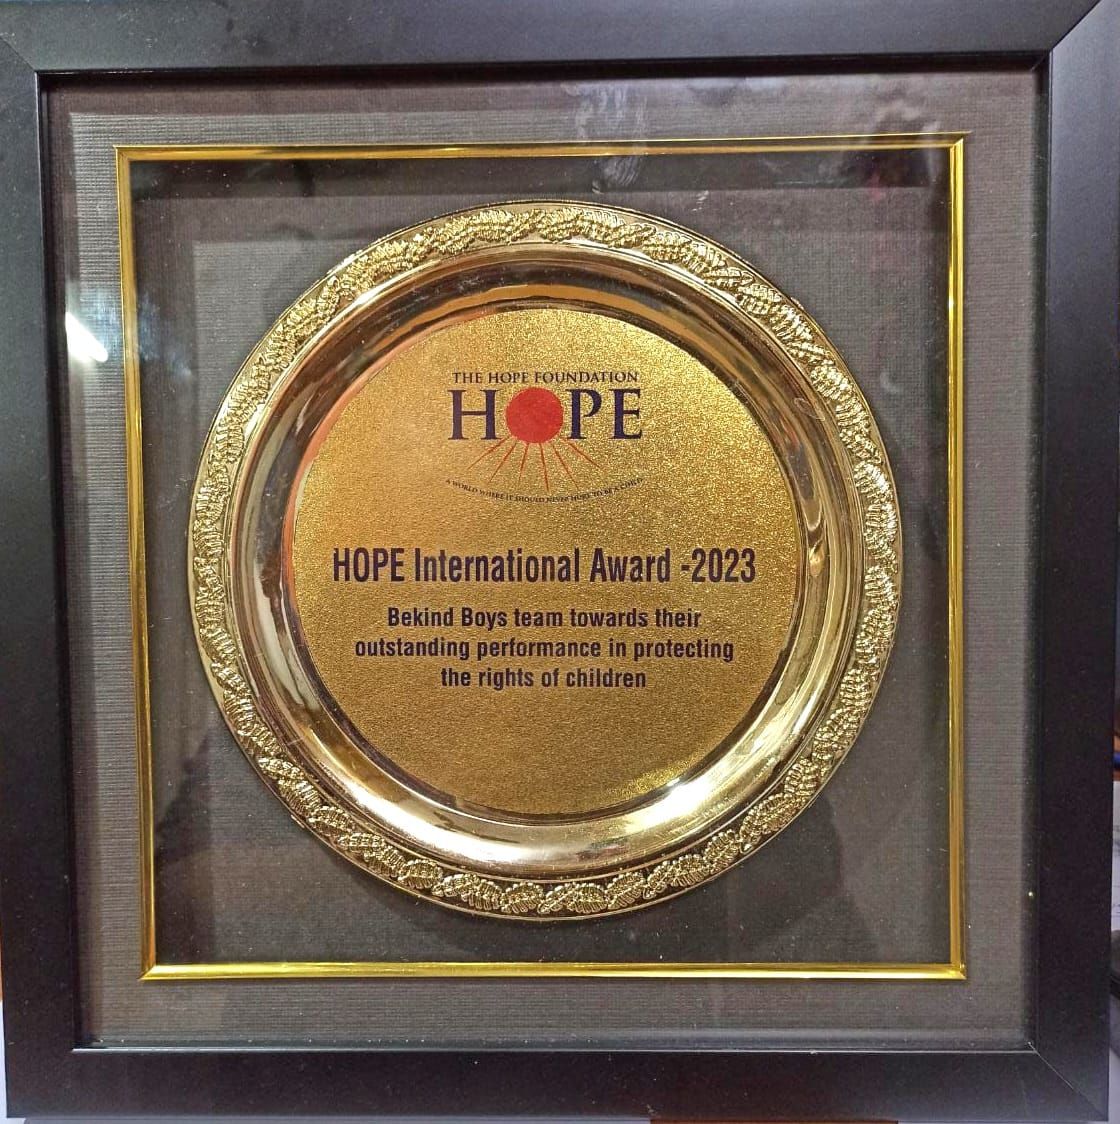 And the Hope International Award 2023 goes to the Bekind Boys team